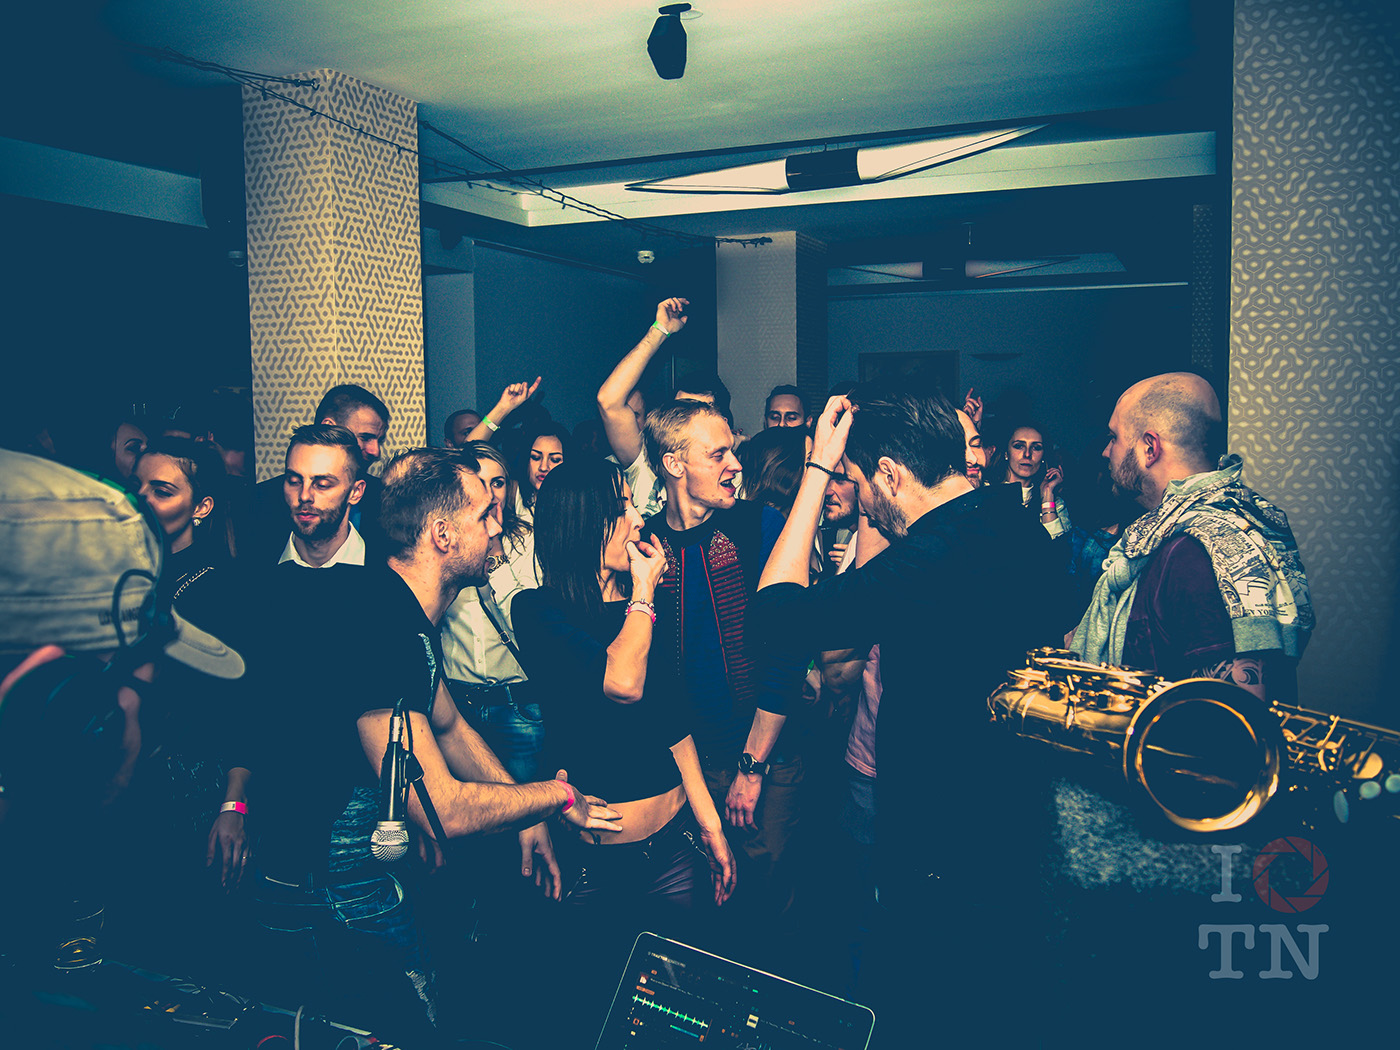 Panorama Club trencin house deep house party